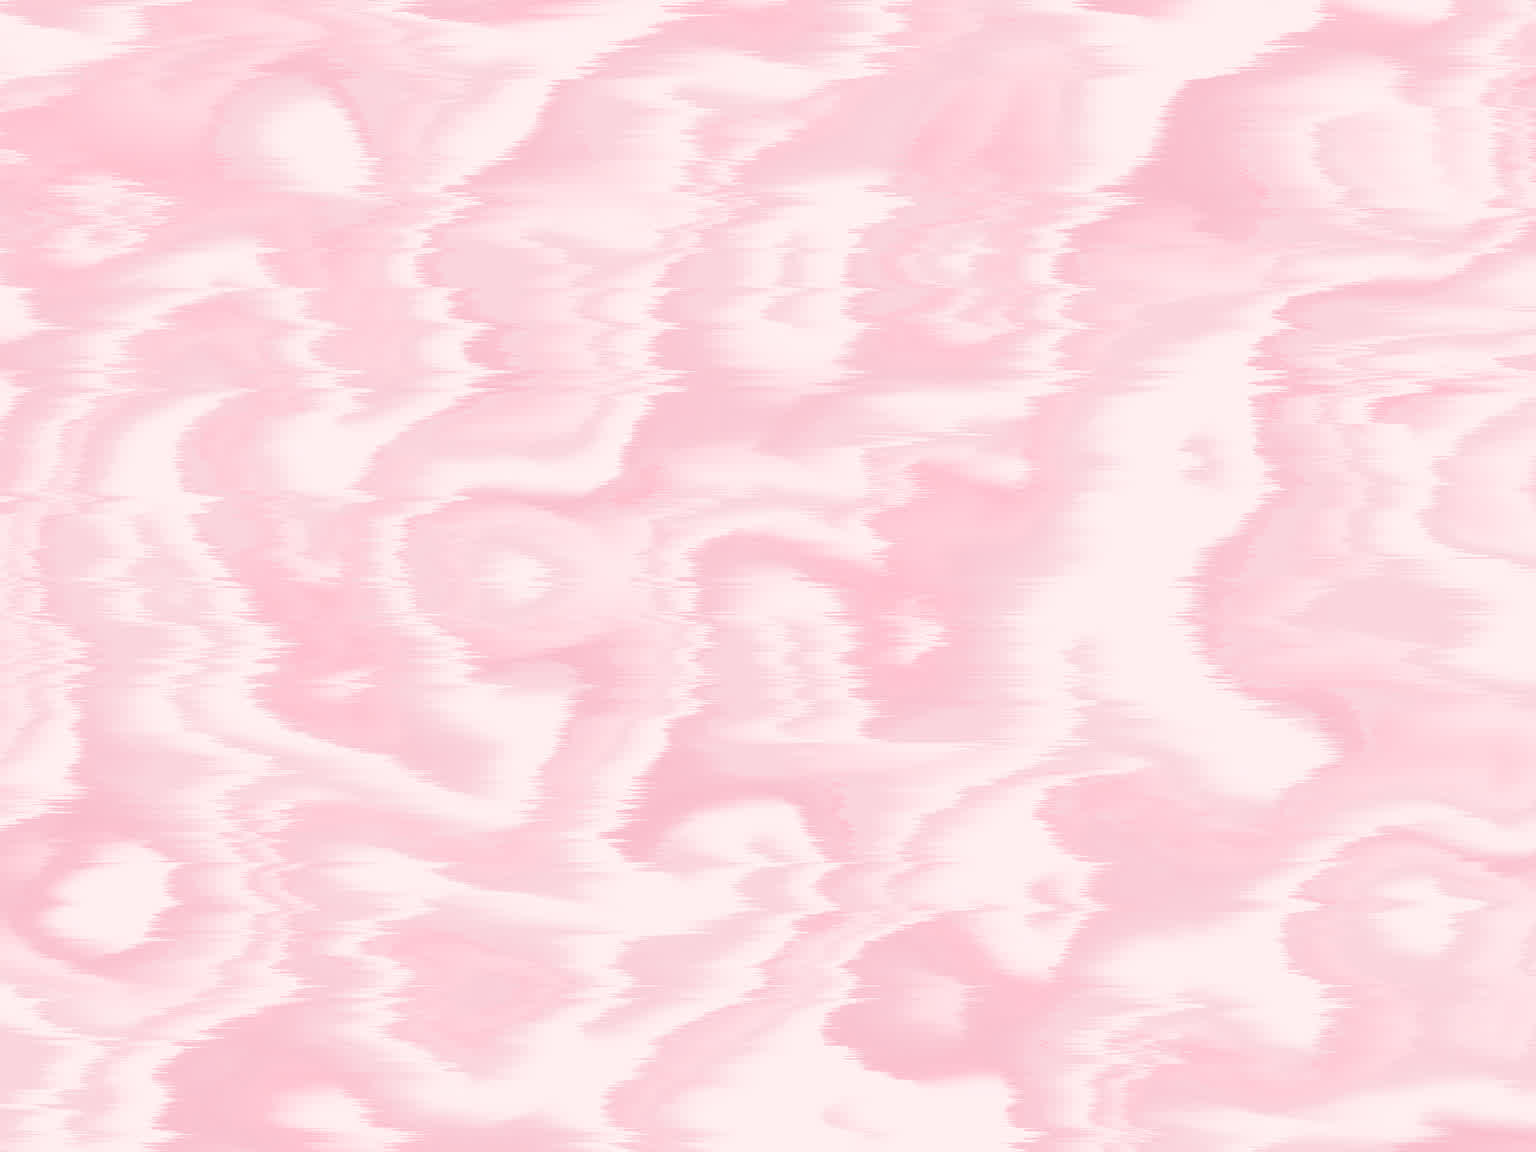 Wavy marbled texture, made using SVG filter primitives